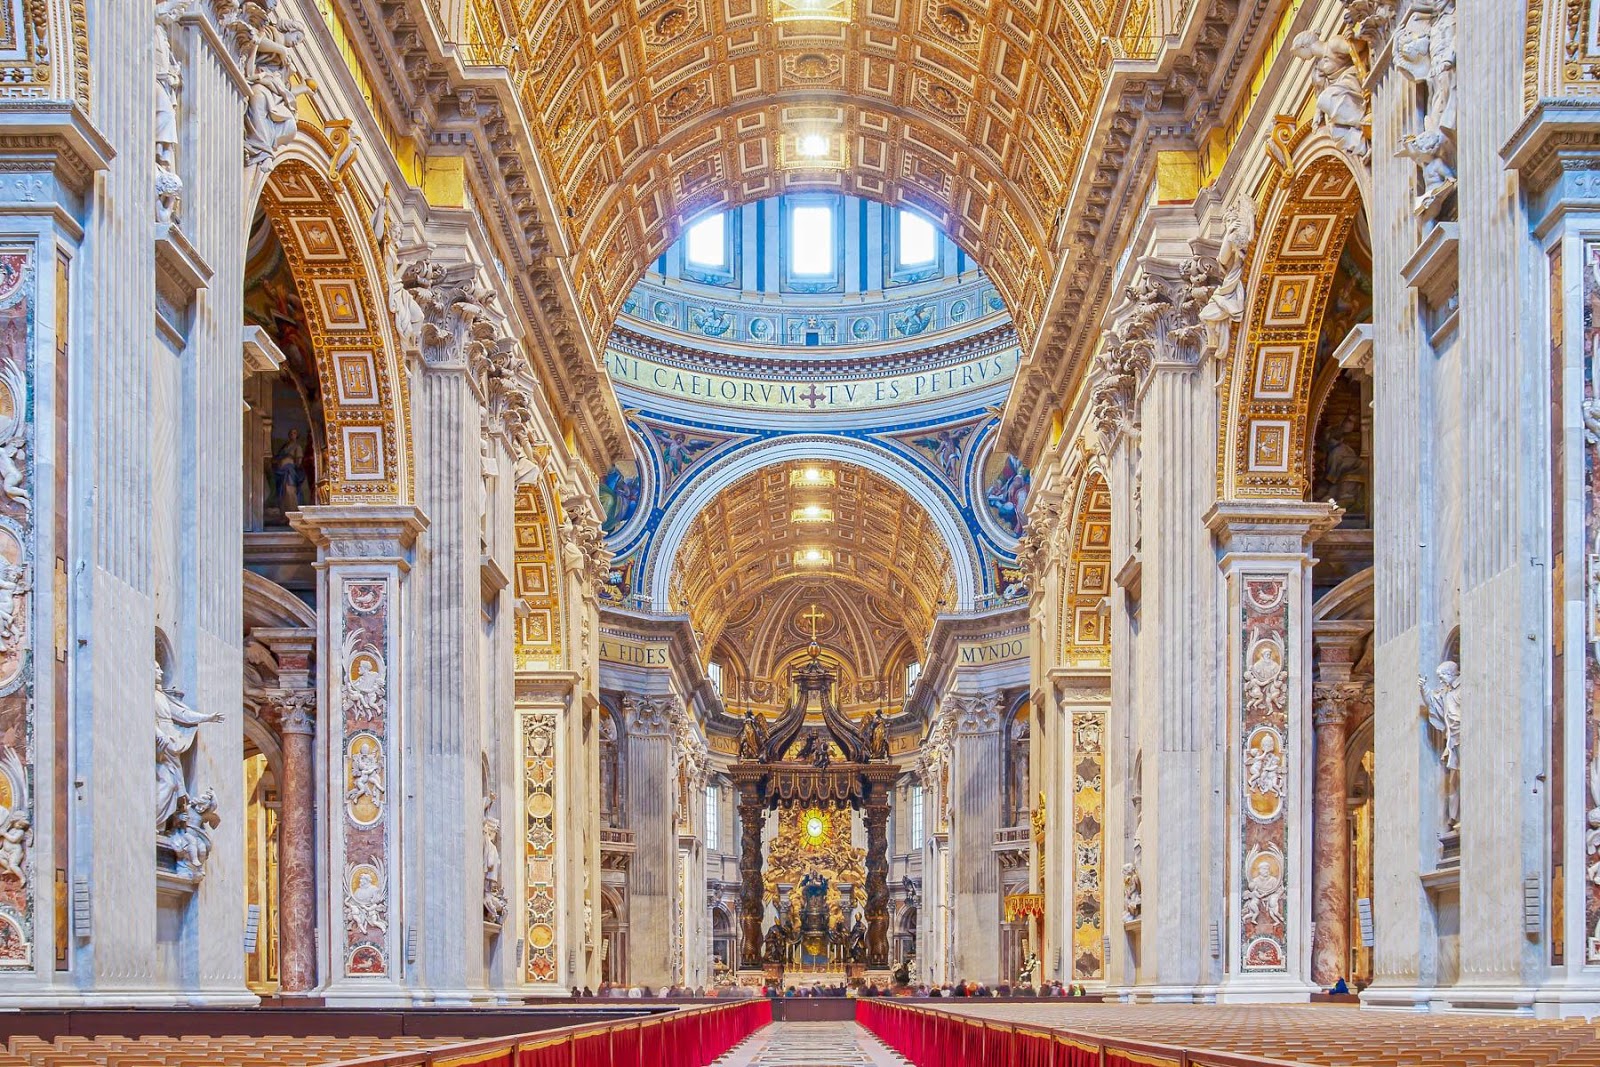 Check Out These Beautiful Holy Sites in Europe